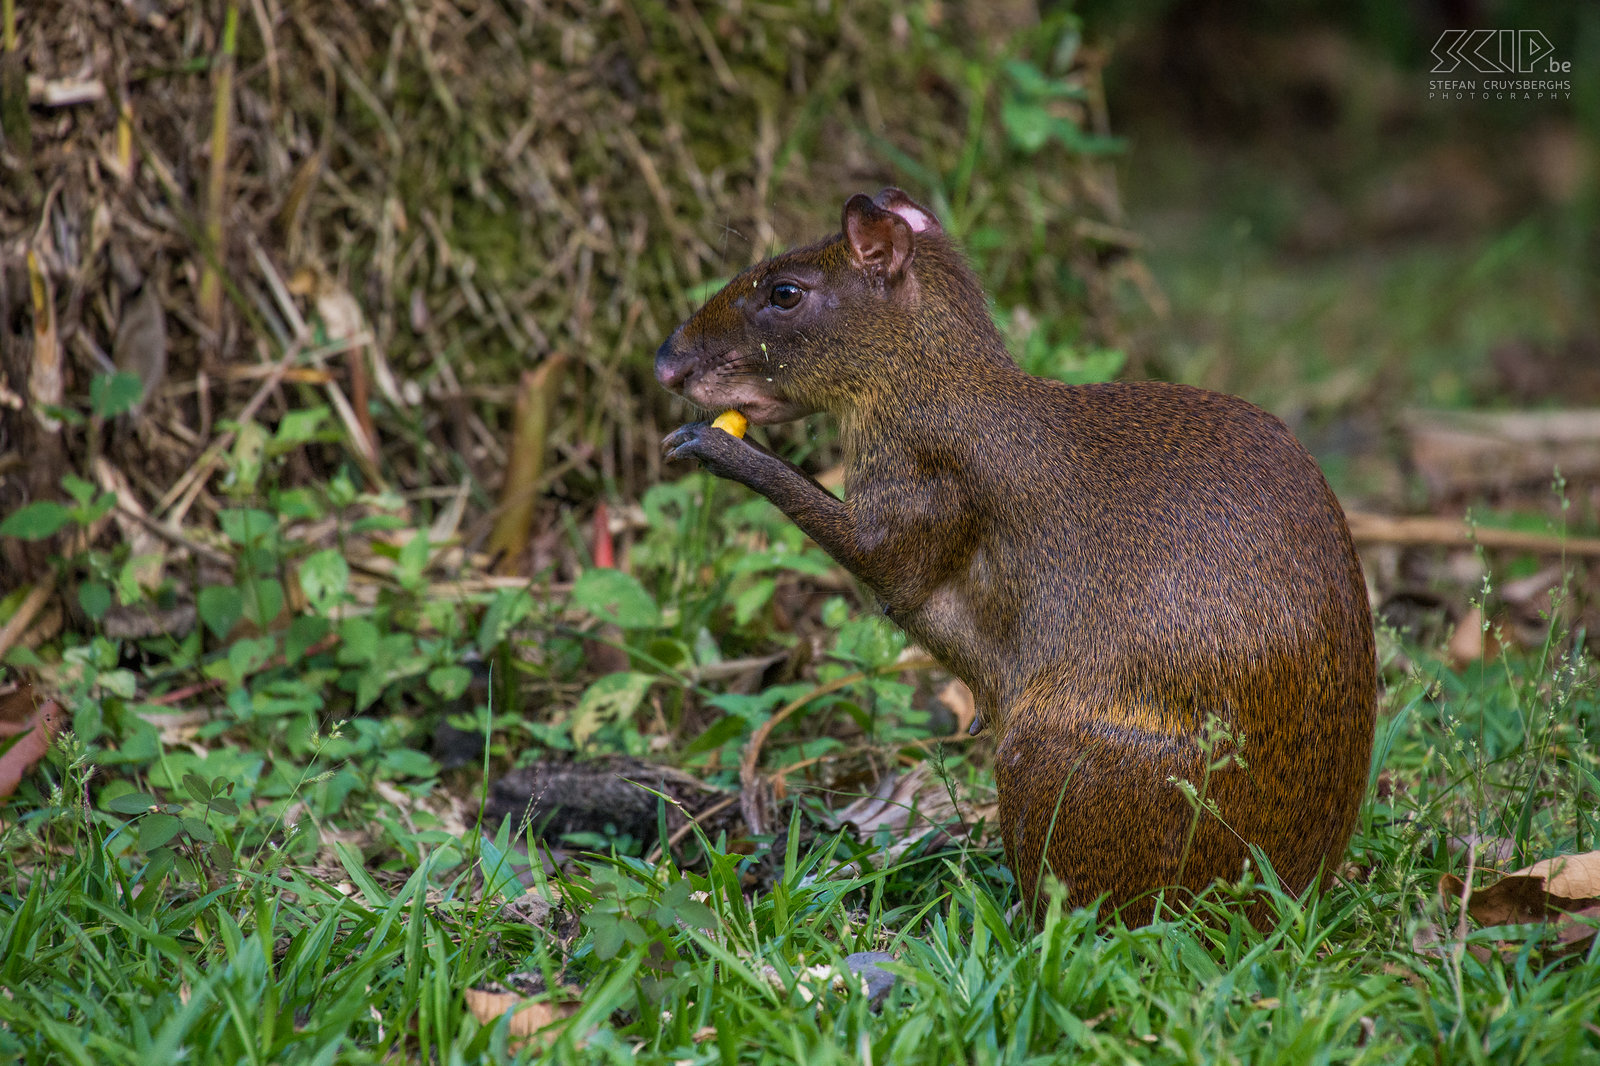 Selva Verde - Agouti The common agouti (dasyprocta) is a rodent native to Central America. They have a brown reddisch fur and a large head and short front legs. Stefan Cruysberghs